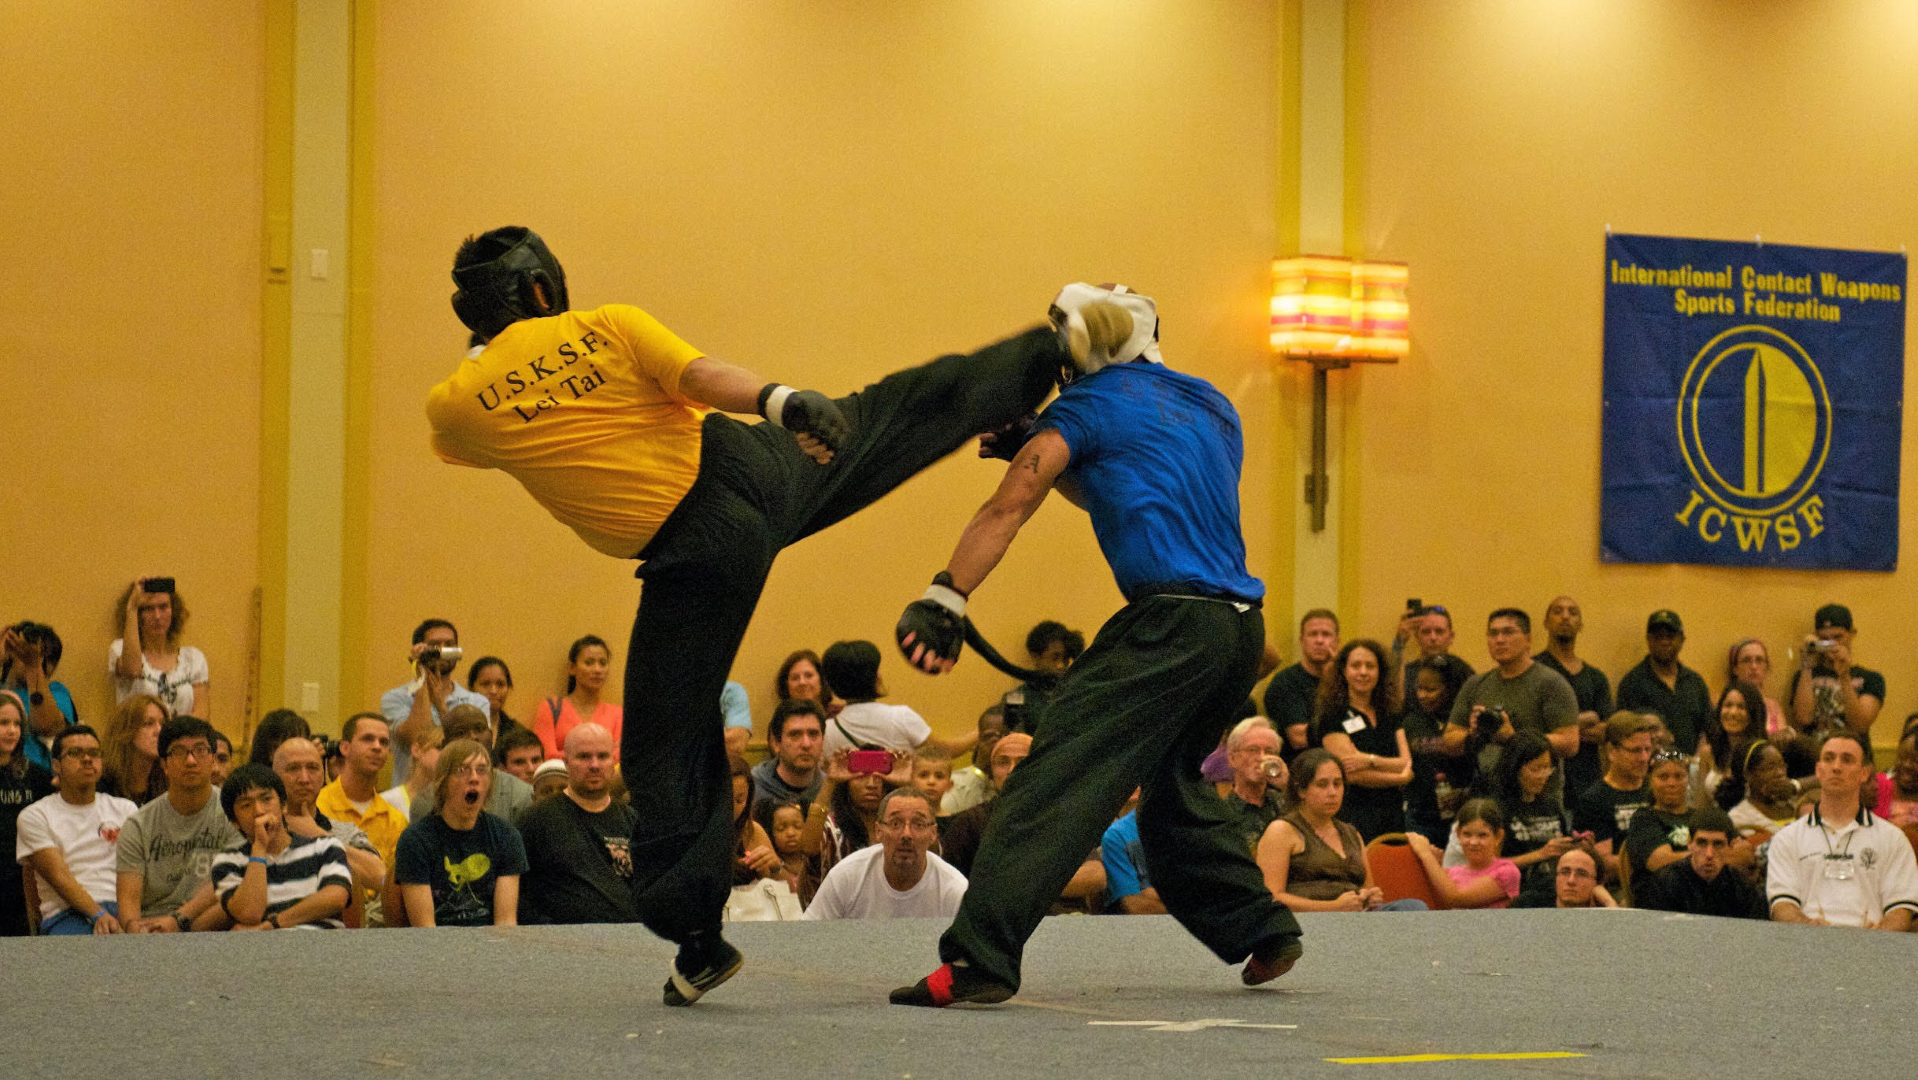 HOW TO CHOOSE THE BEST STYLE OF MARTIAL ARTS FOR ME